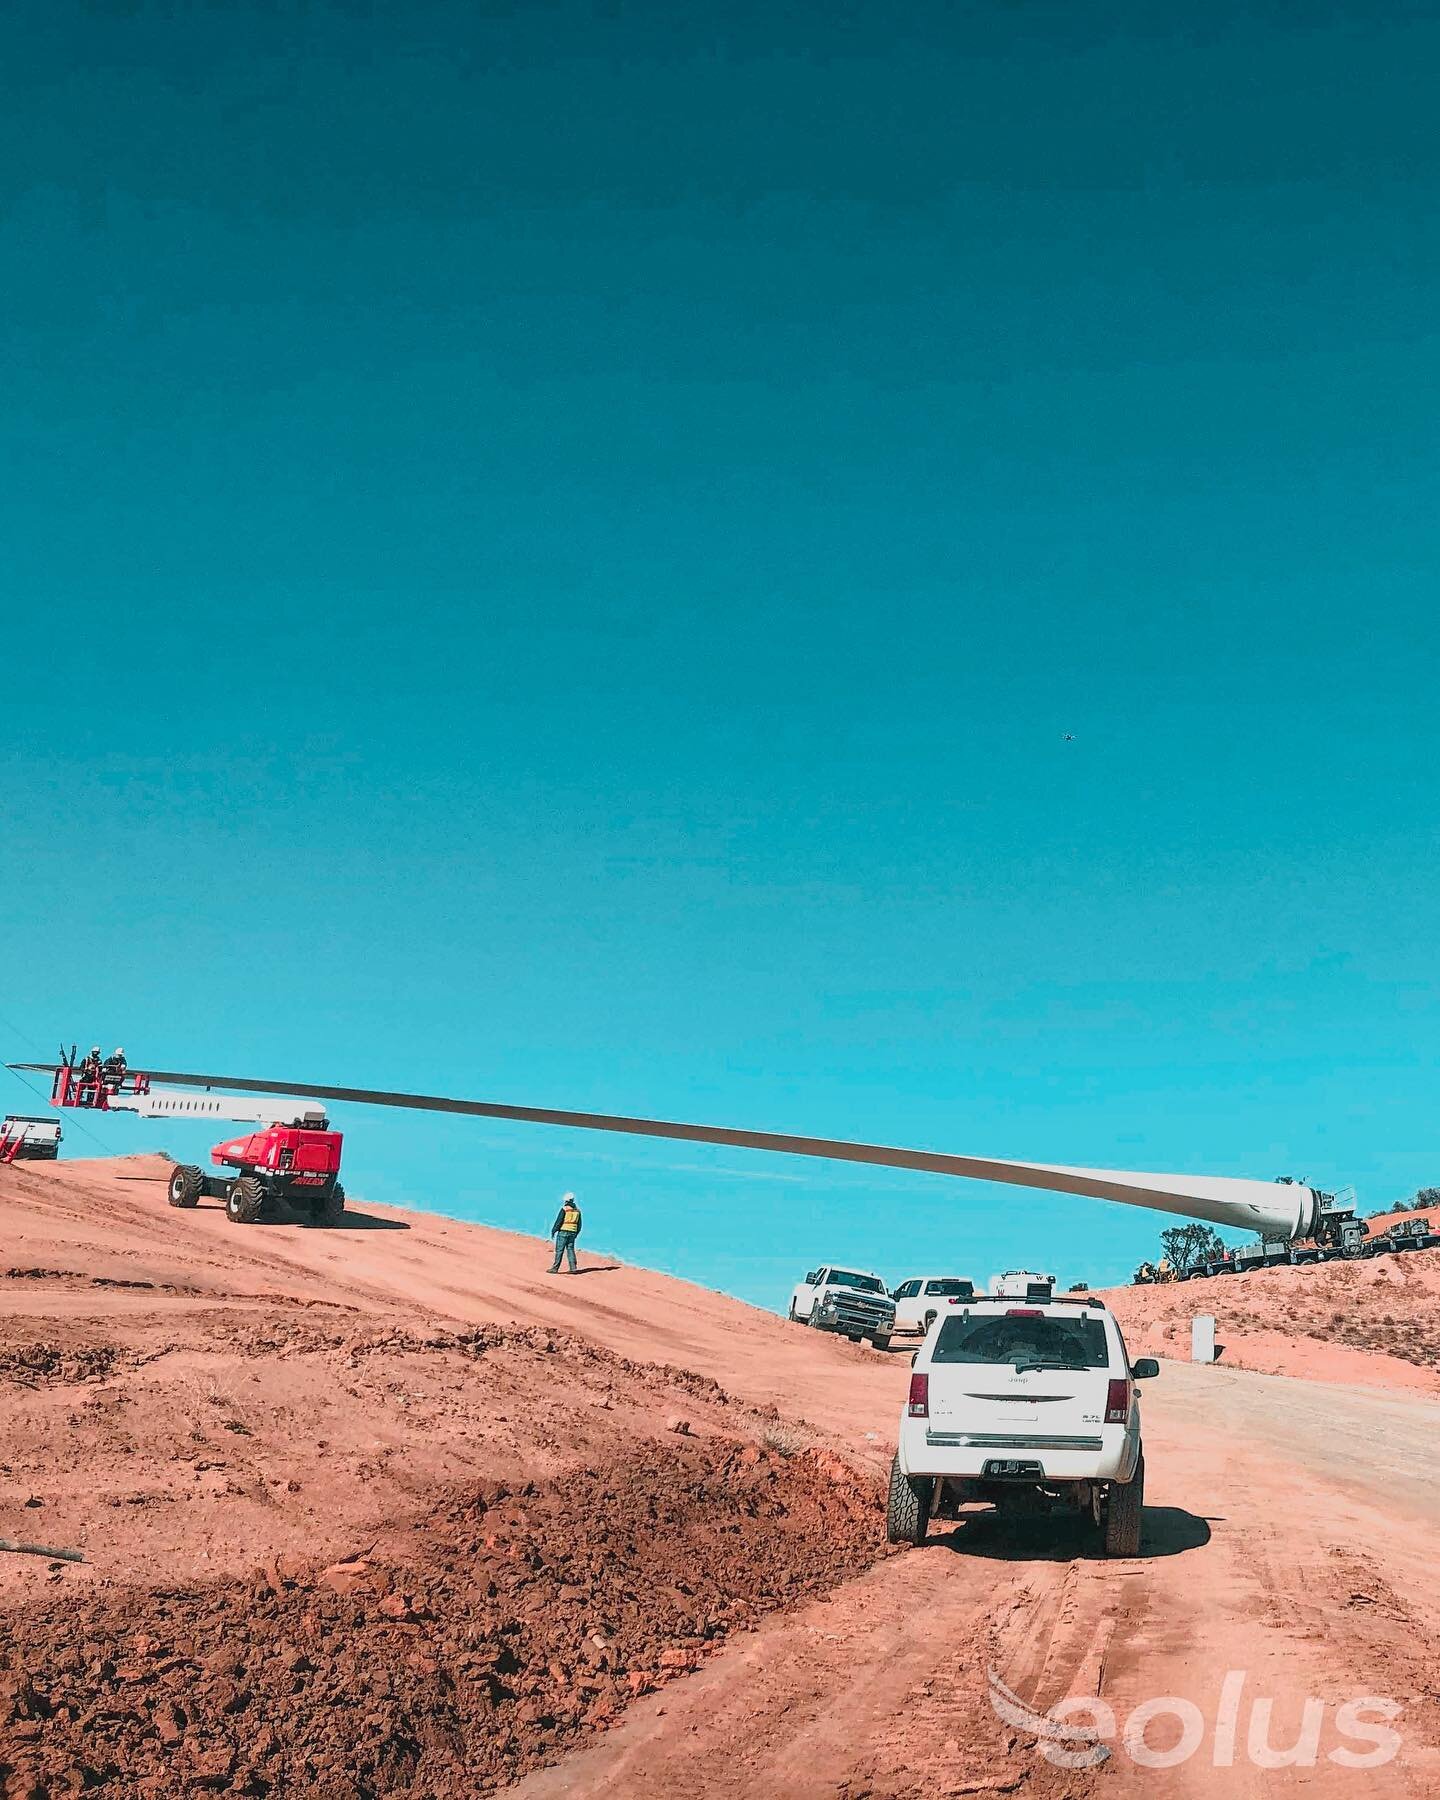 Have you ever wondered how 202.4 ft (61.7 m) long wind turbine blades are transported up a steep hill? Here&rsquo;s how!
#WindWall1 #windenergy #windpower #windturbine #windturbines #wind #windfarm #renewableenergy #renewables #cleanpower #cleanenerg